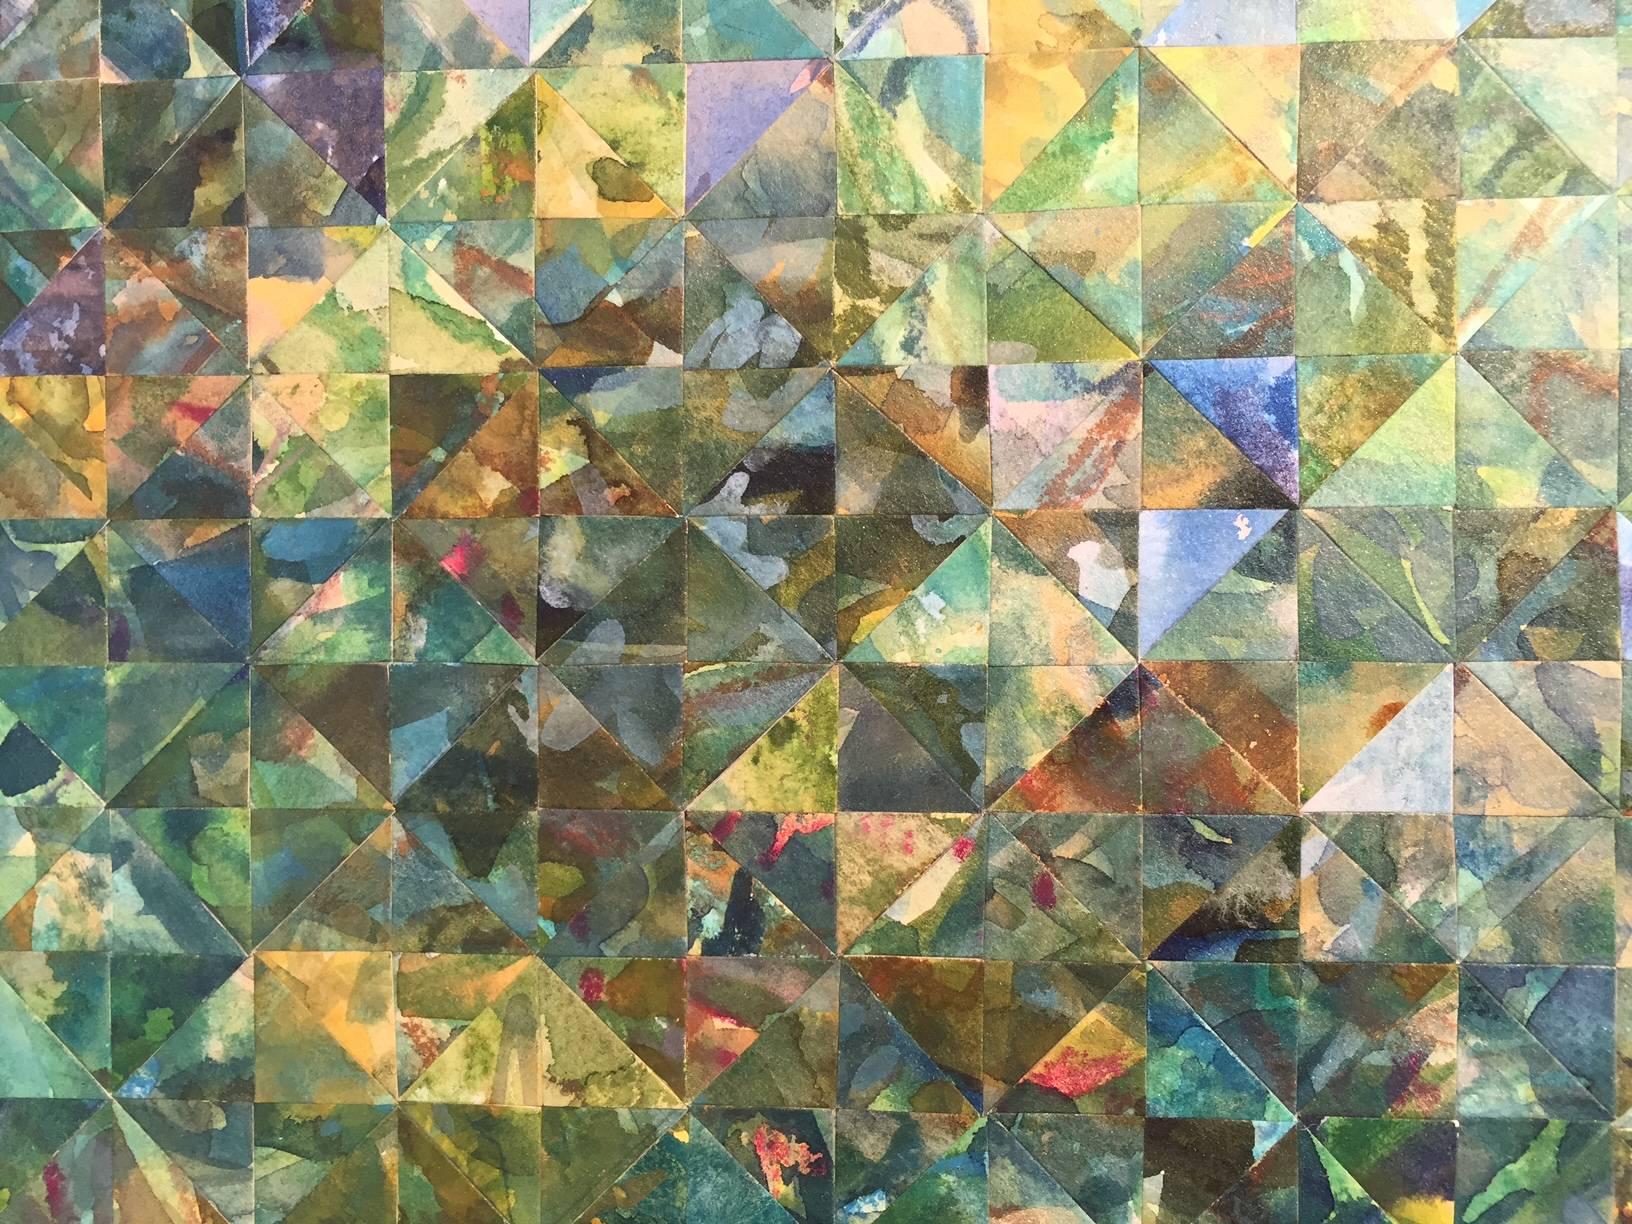 Enigma in Green - Abstract Geometric Art by Irene Zweig